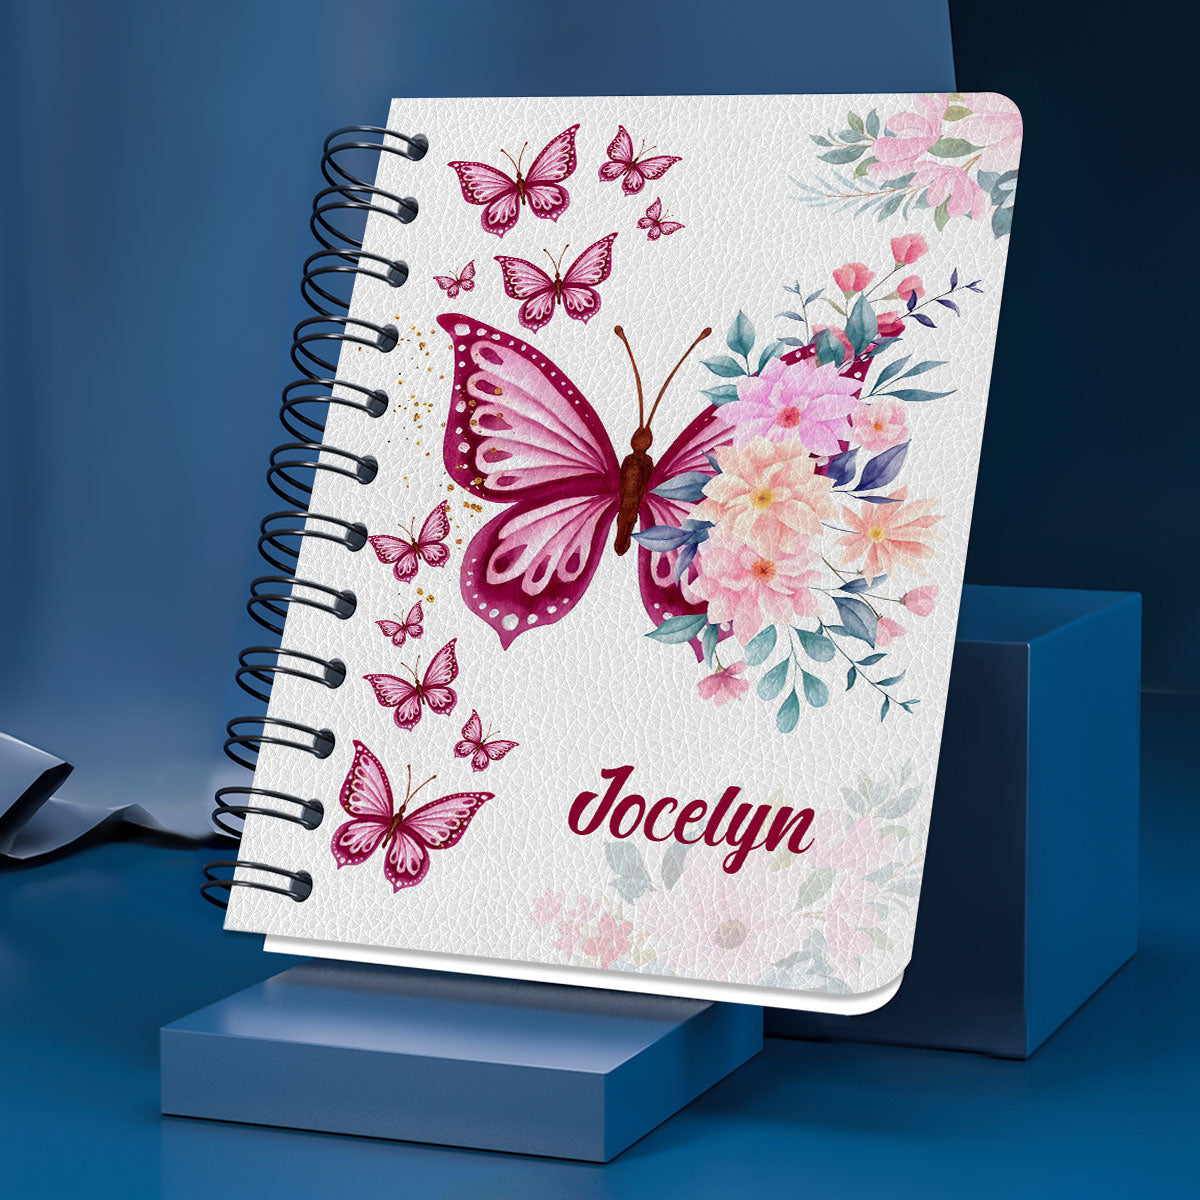 Personalized Spiral Journal Flower & Butterfly Psalms 91 Christian Gifts For Family, Religious Gifts For Christian